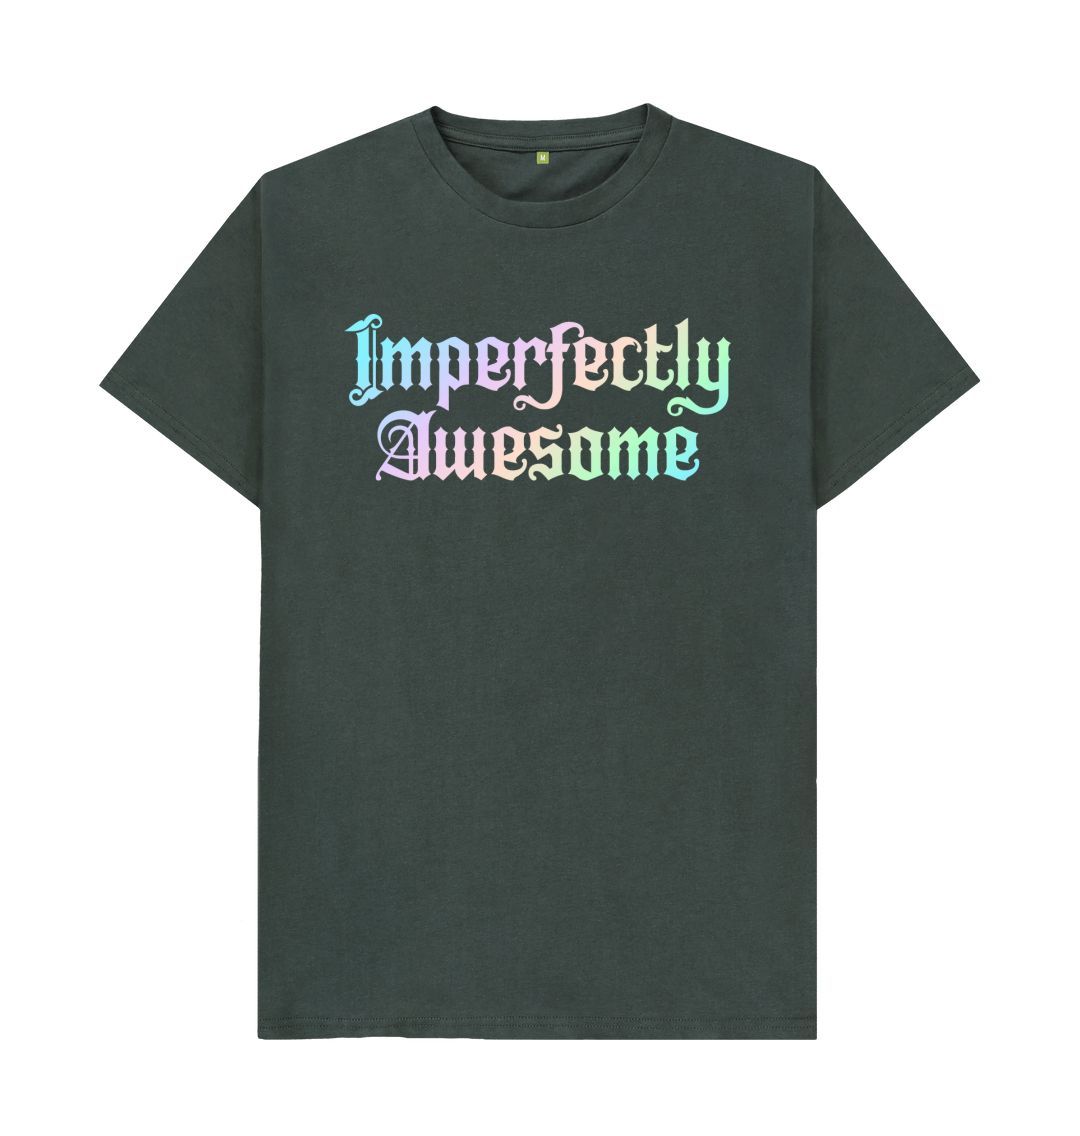 Dark Grey Imperfectly Awesome Tee